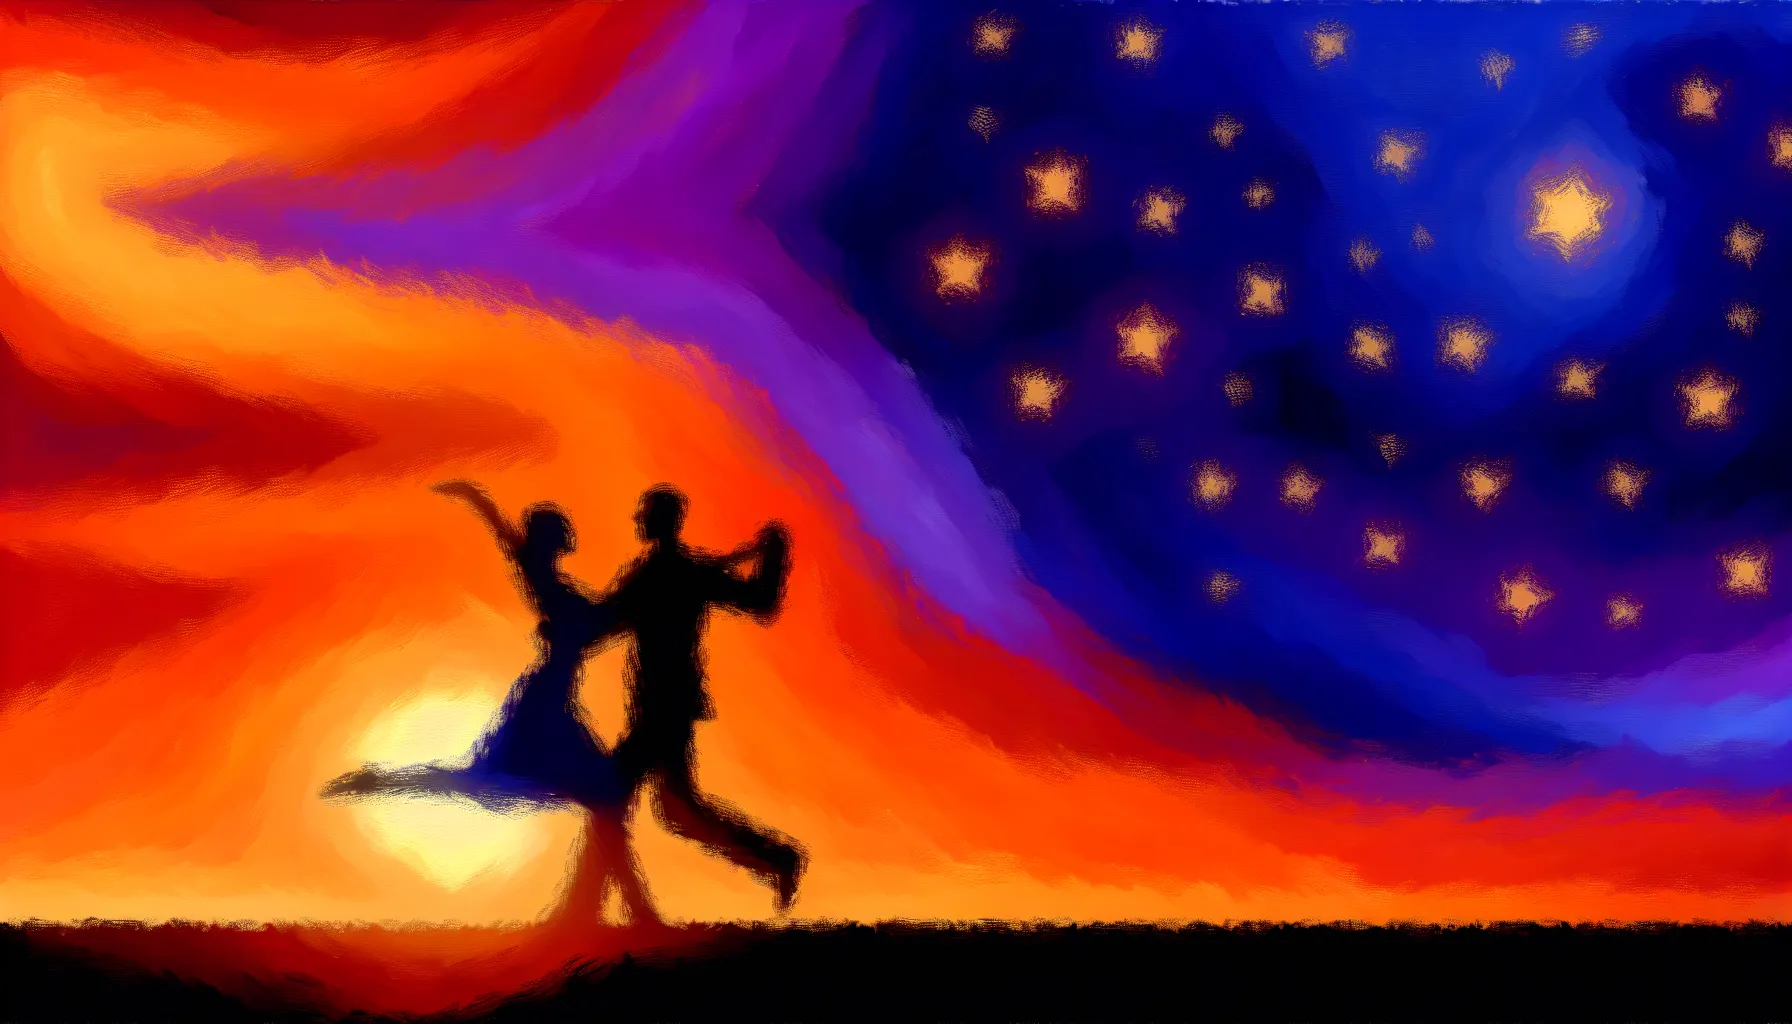 <strong>Twilight Tango:</strong> As dusk embraces the stars, so does an empowered woman's spirit enliven the connection with her junior partner, setting the stage for a love story that defies the ticking clock.